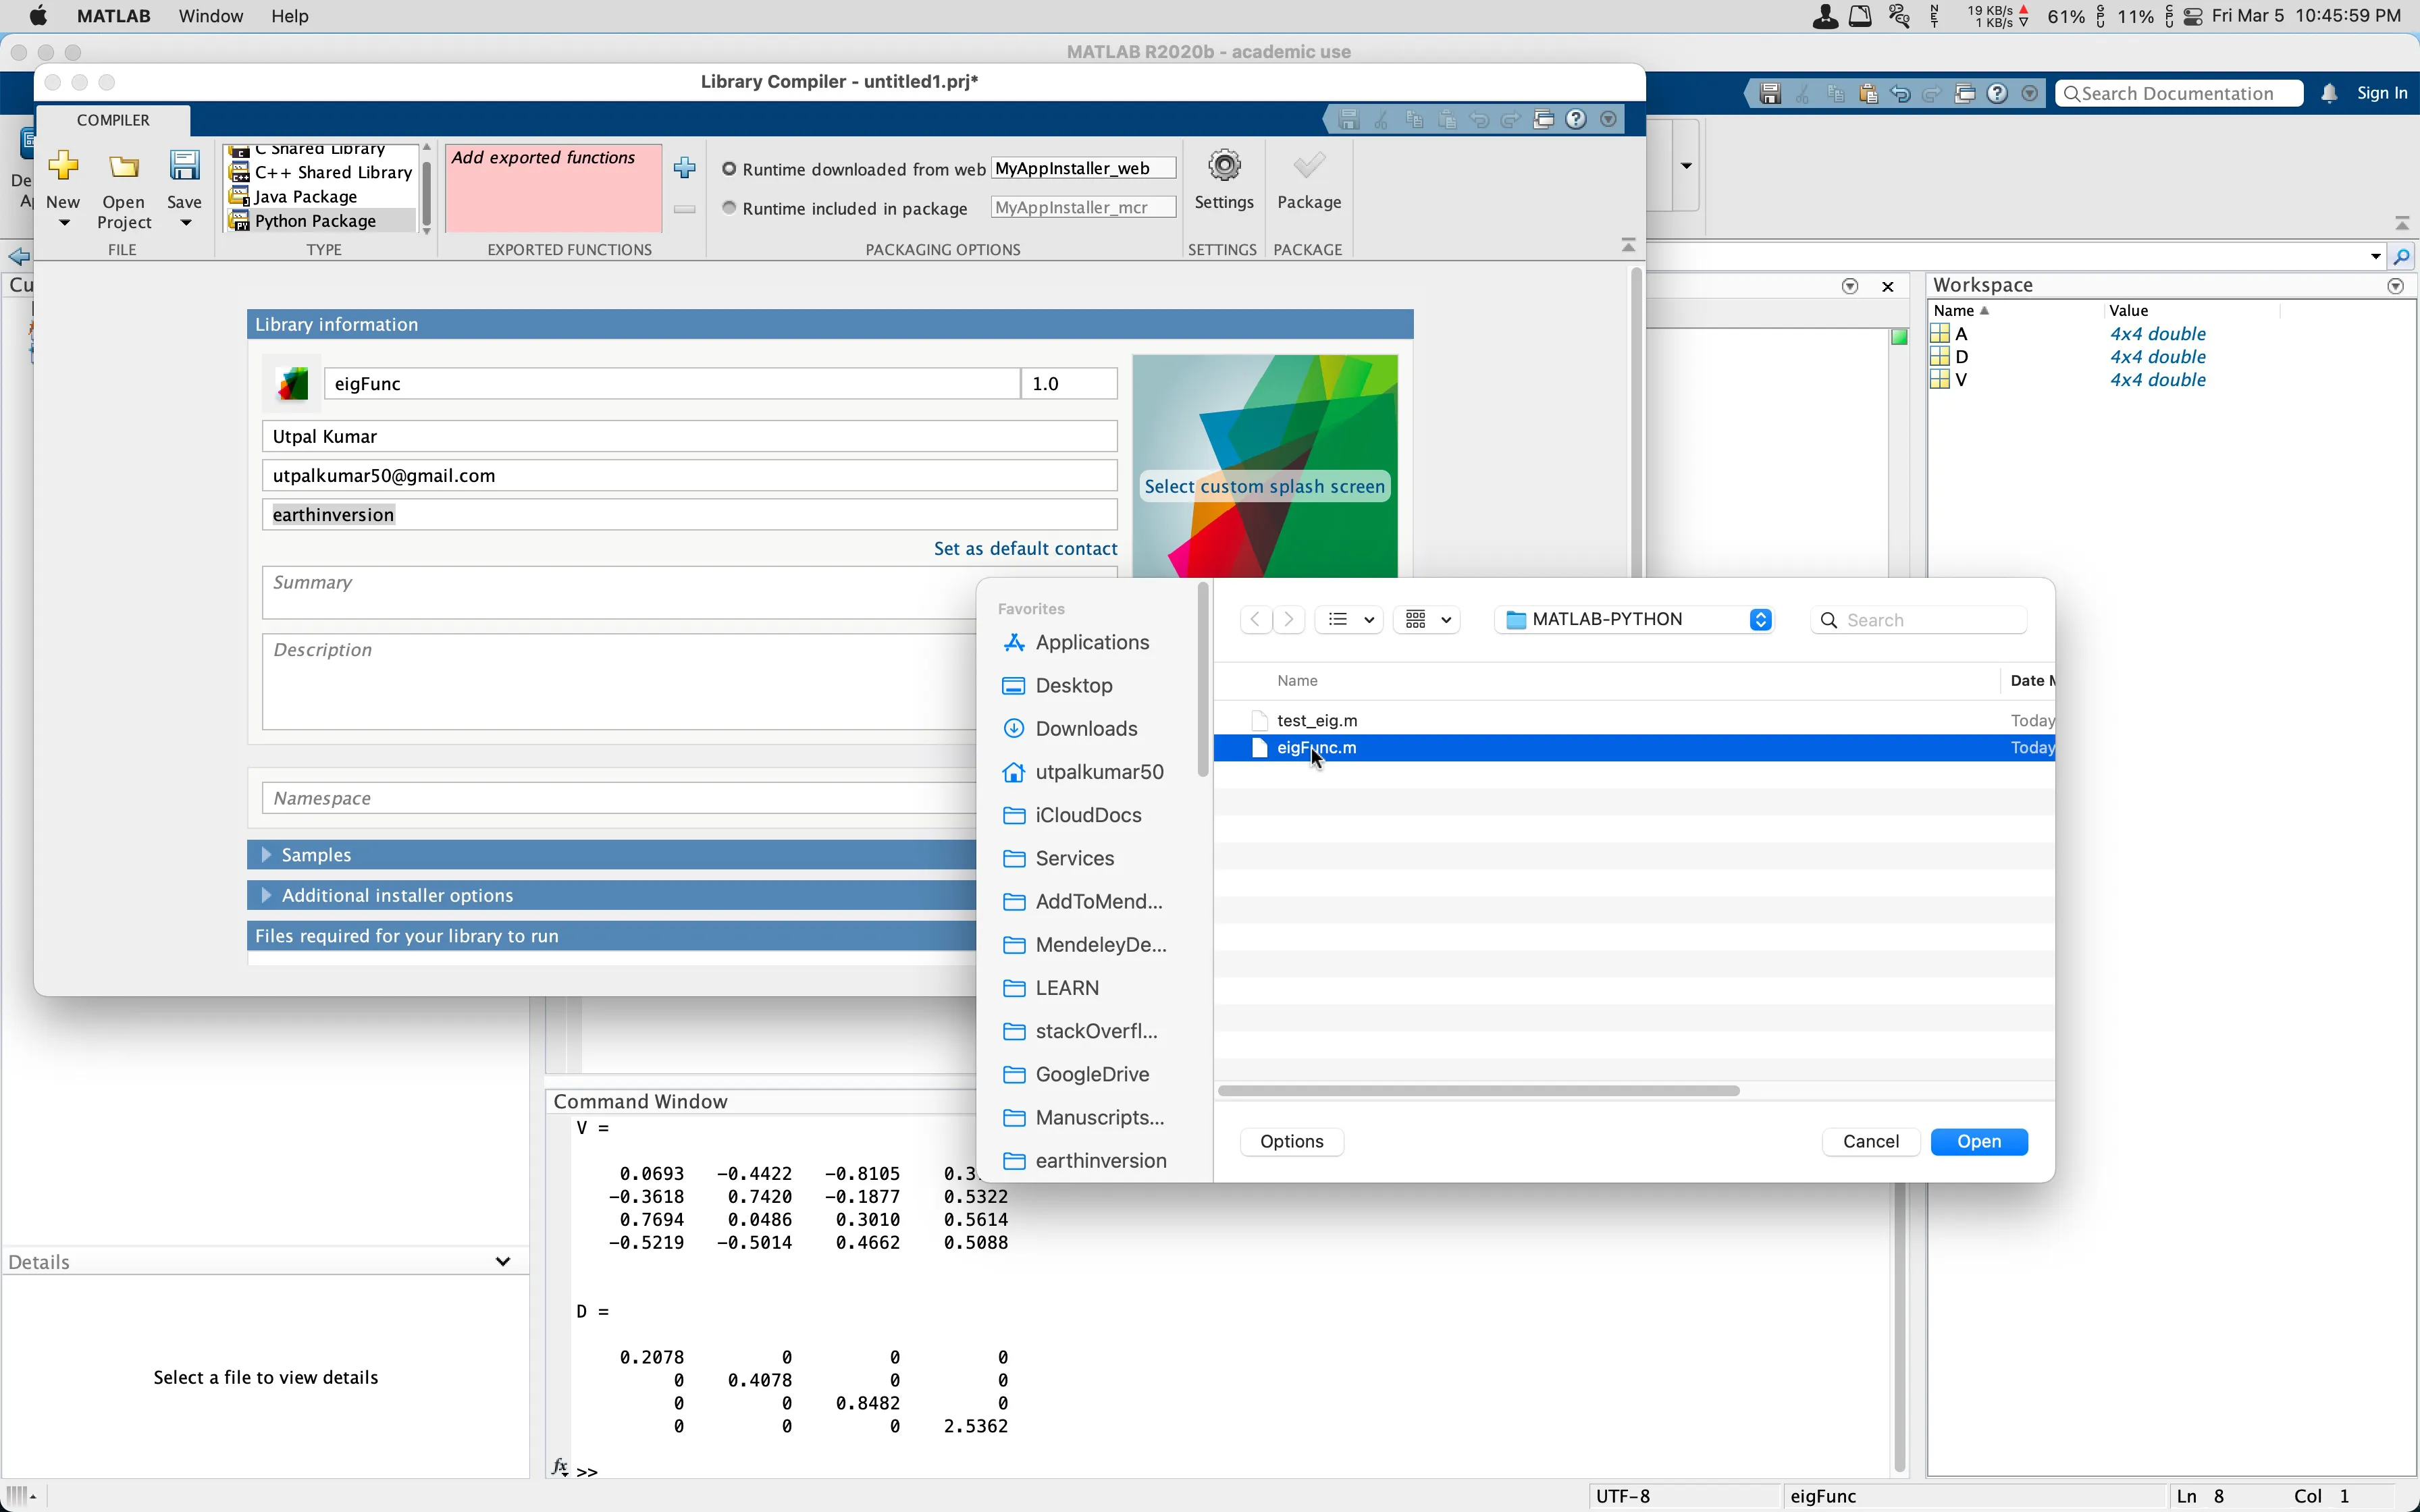 select library compiler app in matlab